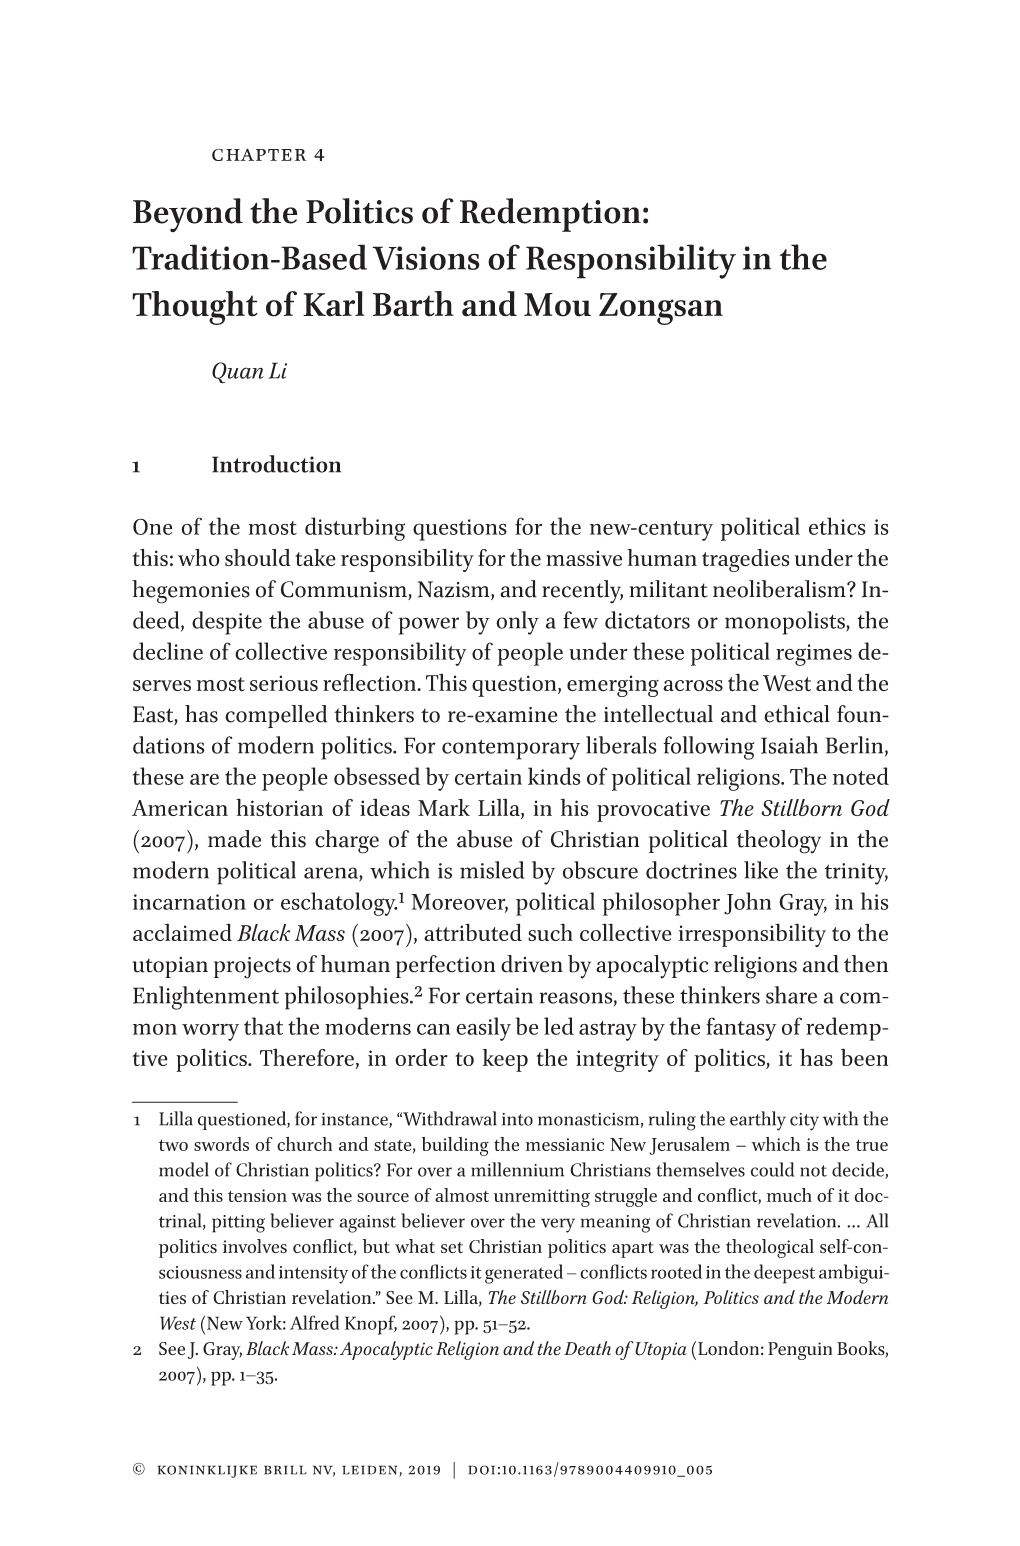 Beyond the Politics of Redemption: Tradition-Based Visions of Responsibility in the Thought of Karl Barth and Mou Zongsan